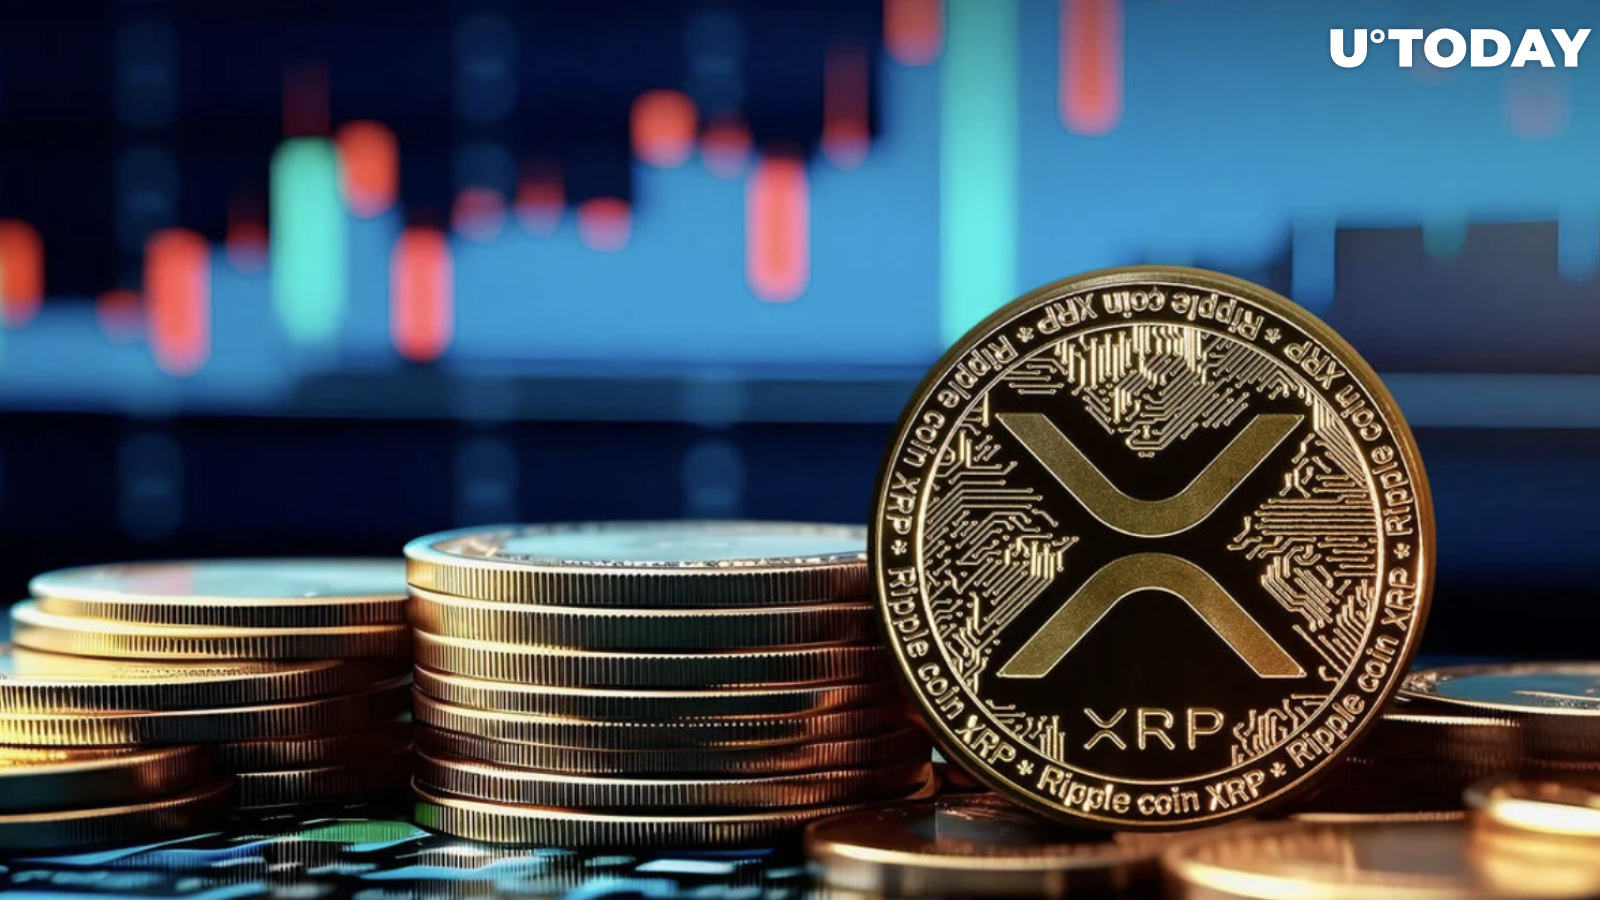 XRP Becomes Best Performing Cryptocurrency in Top 100 After Sudden Price Surge 